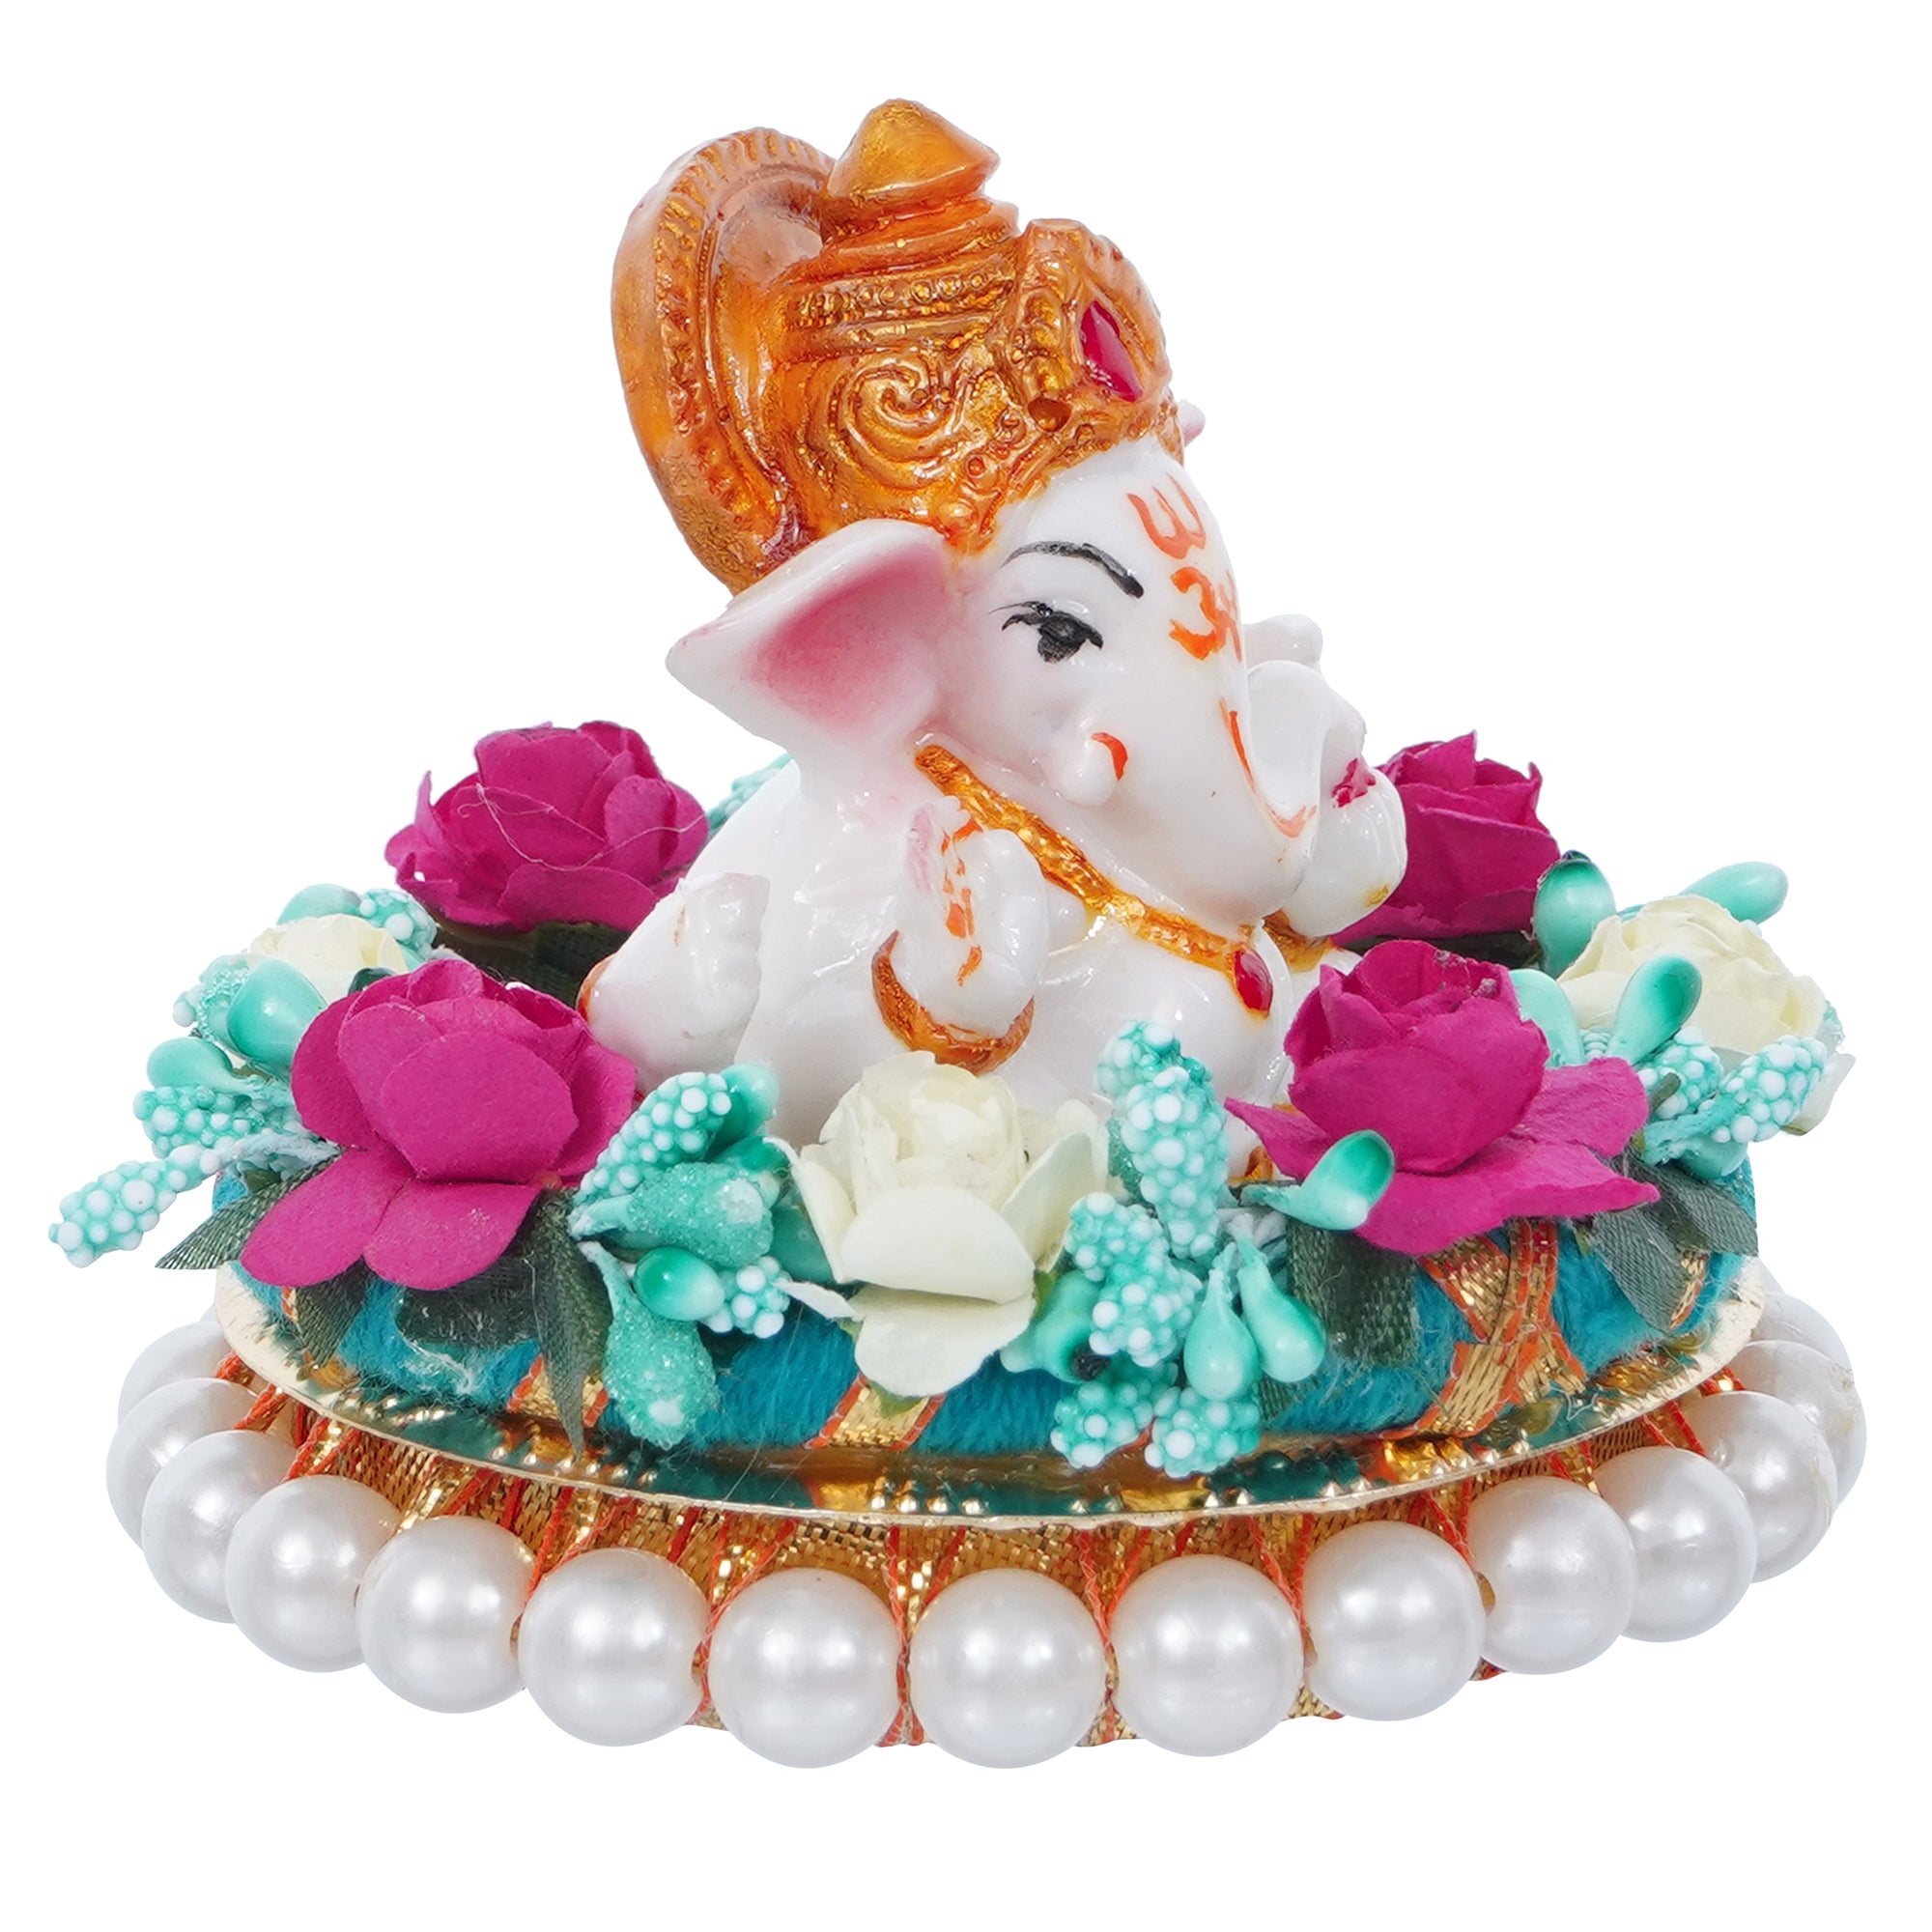 Lord Ganesha Idol on Decorative Handcrafted Plate with Colorful Flowers 4